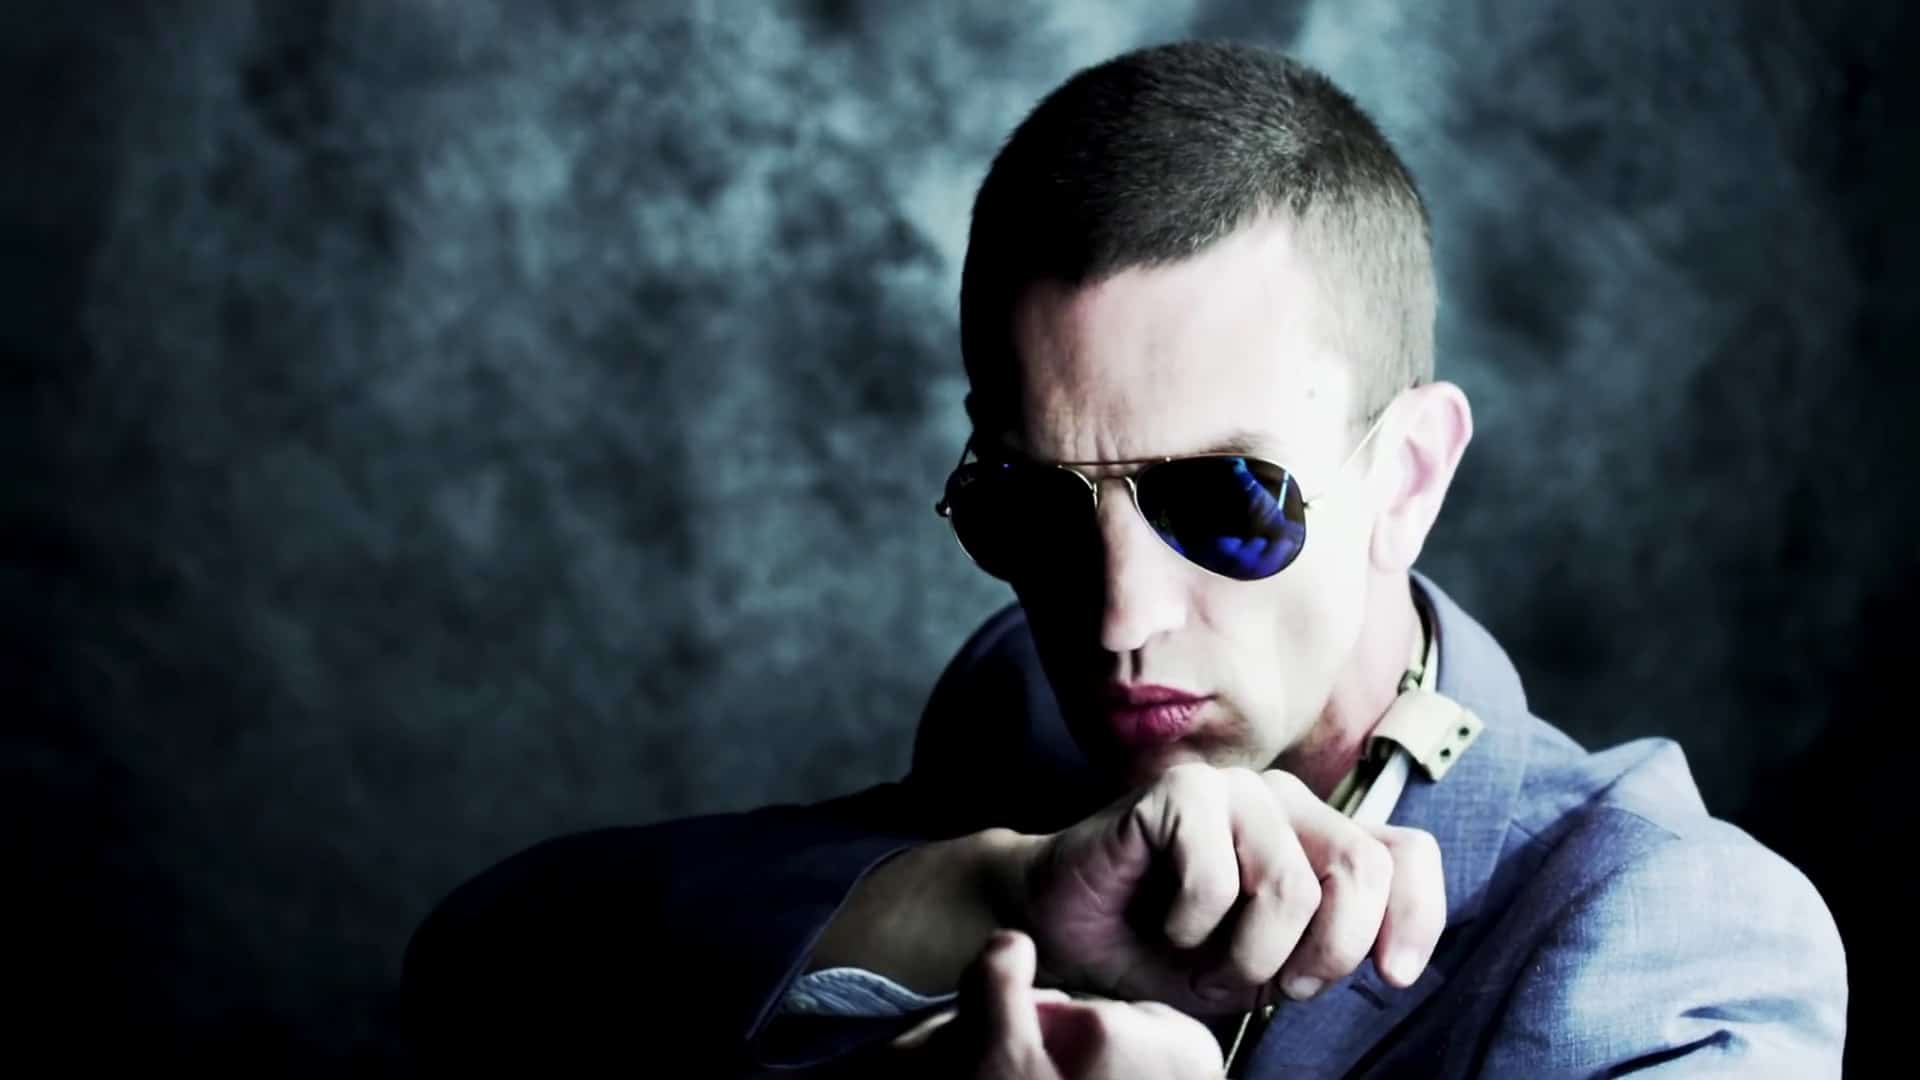 Richard Ashcroft - This Is How It Feels